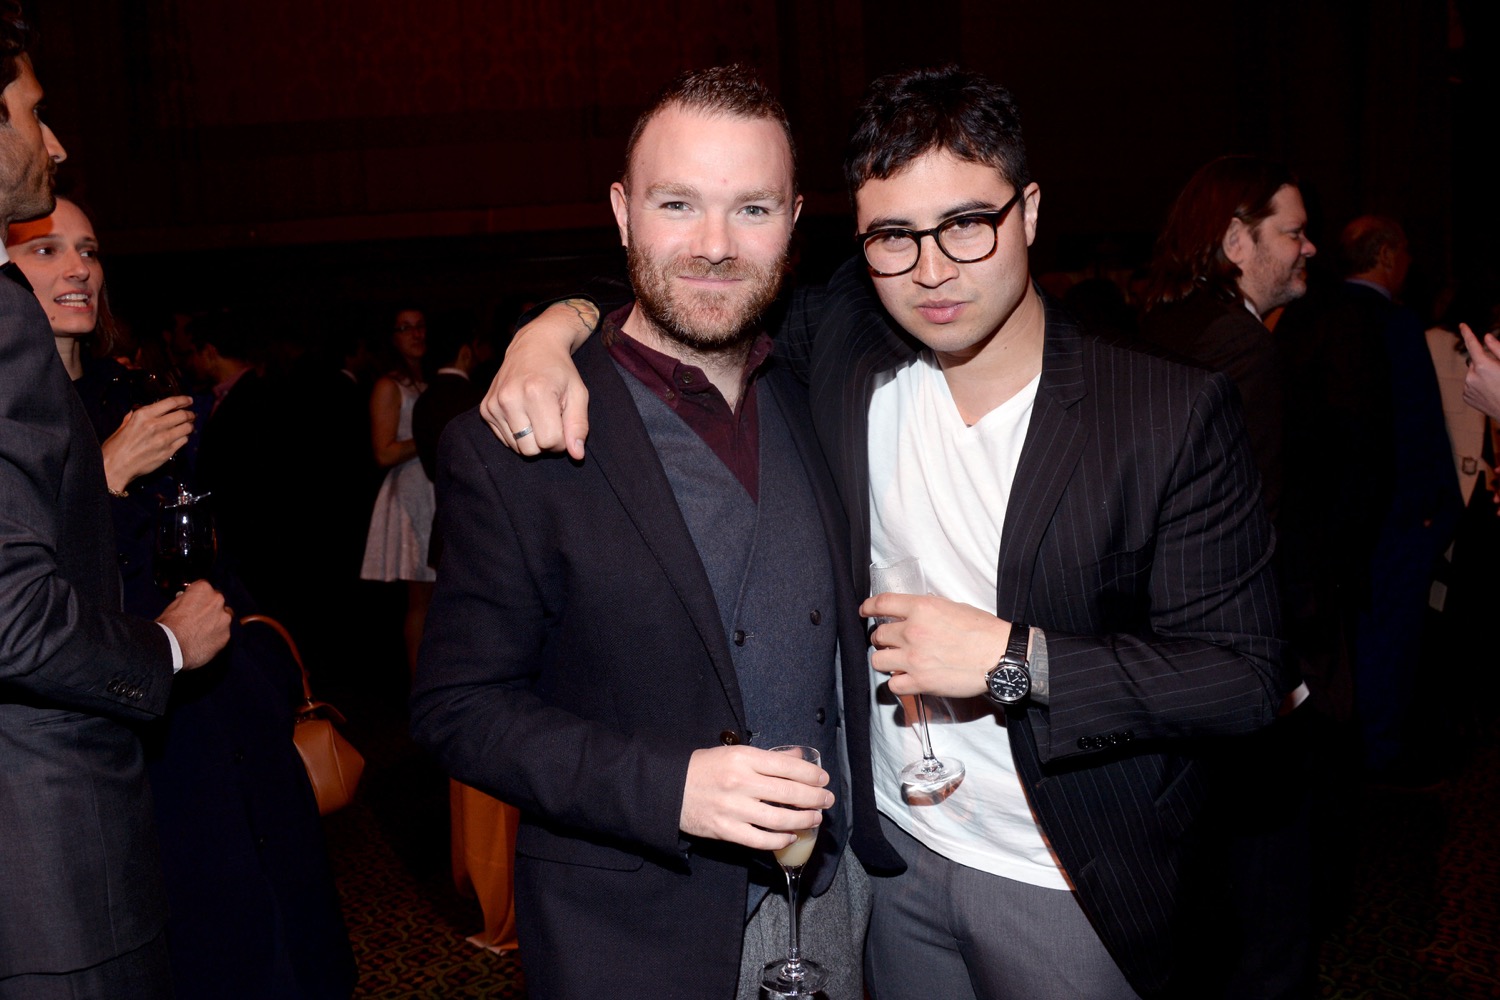 Darragh McKeon, Ian Seiter== The Paris Review 2016 Spring Revel== Cipriani 42nd Street, NYC== April 5, 2016== ©Patrick McMullan== Photo - Clint Spaulding/PMC==